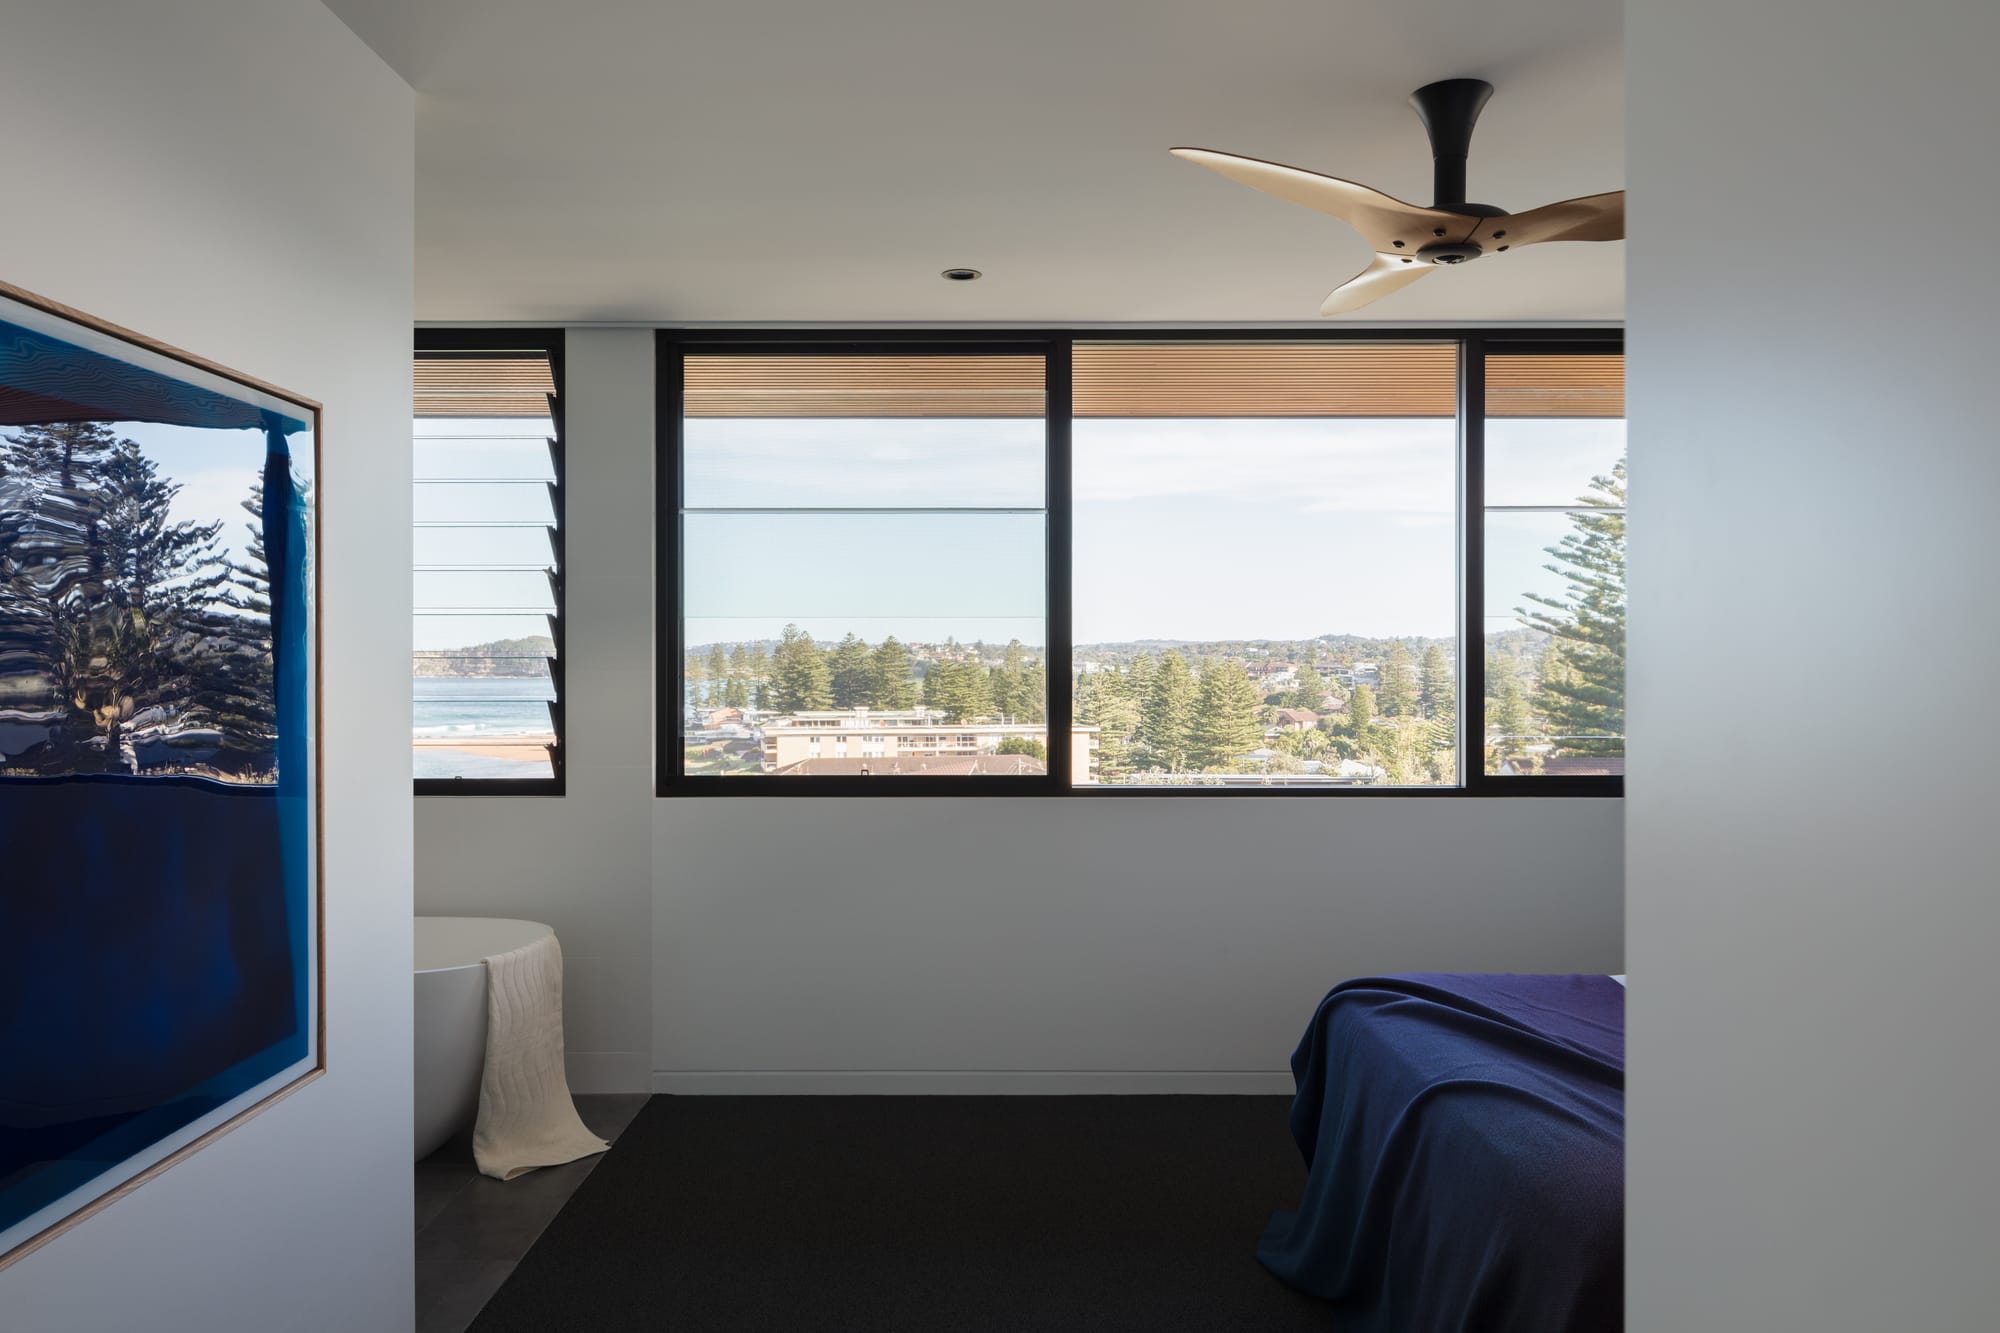 Grandview House by Ian Bennett Design Studio. Photography by Clinton Weaver. Residential bedroom with black framed windows overlooking the beach. Dark carpets, blue bed spread and blue artwork on left wall. 